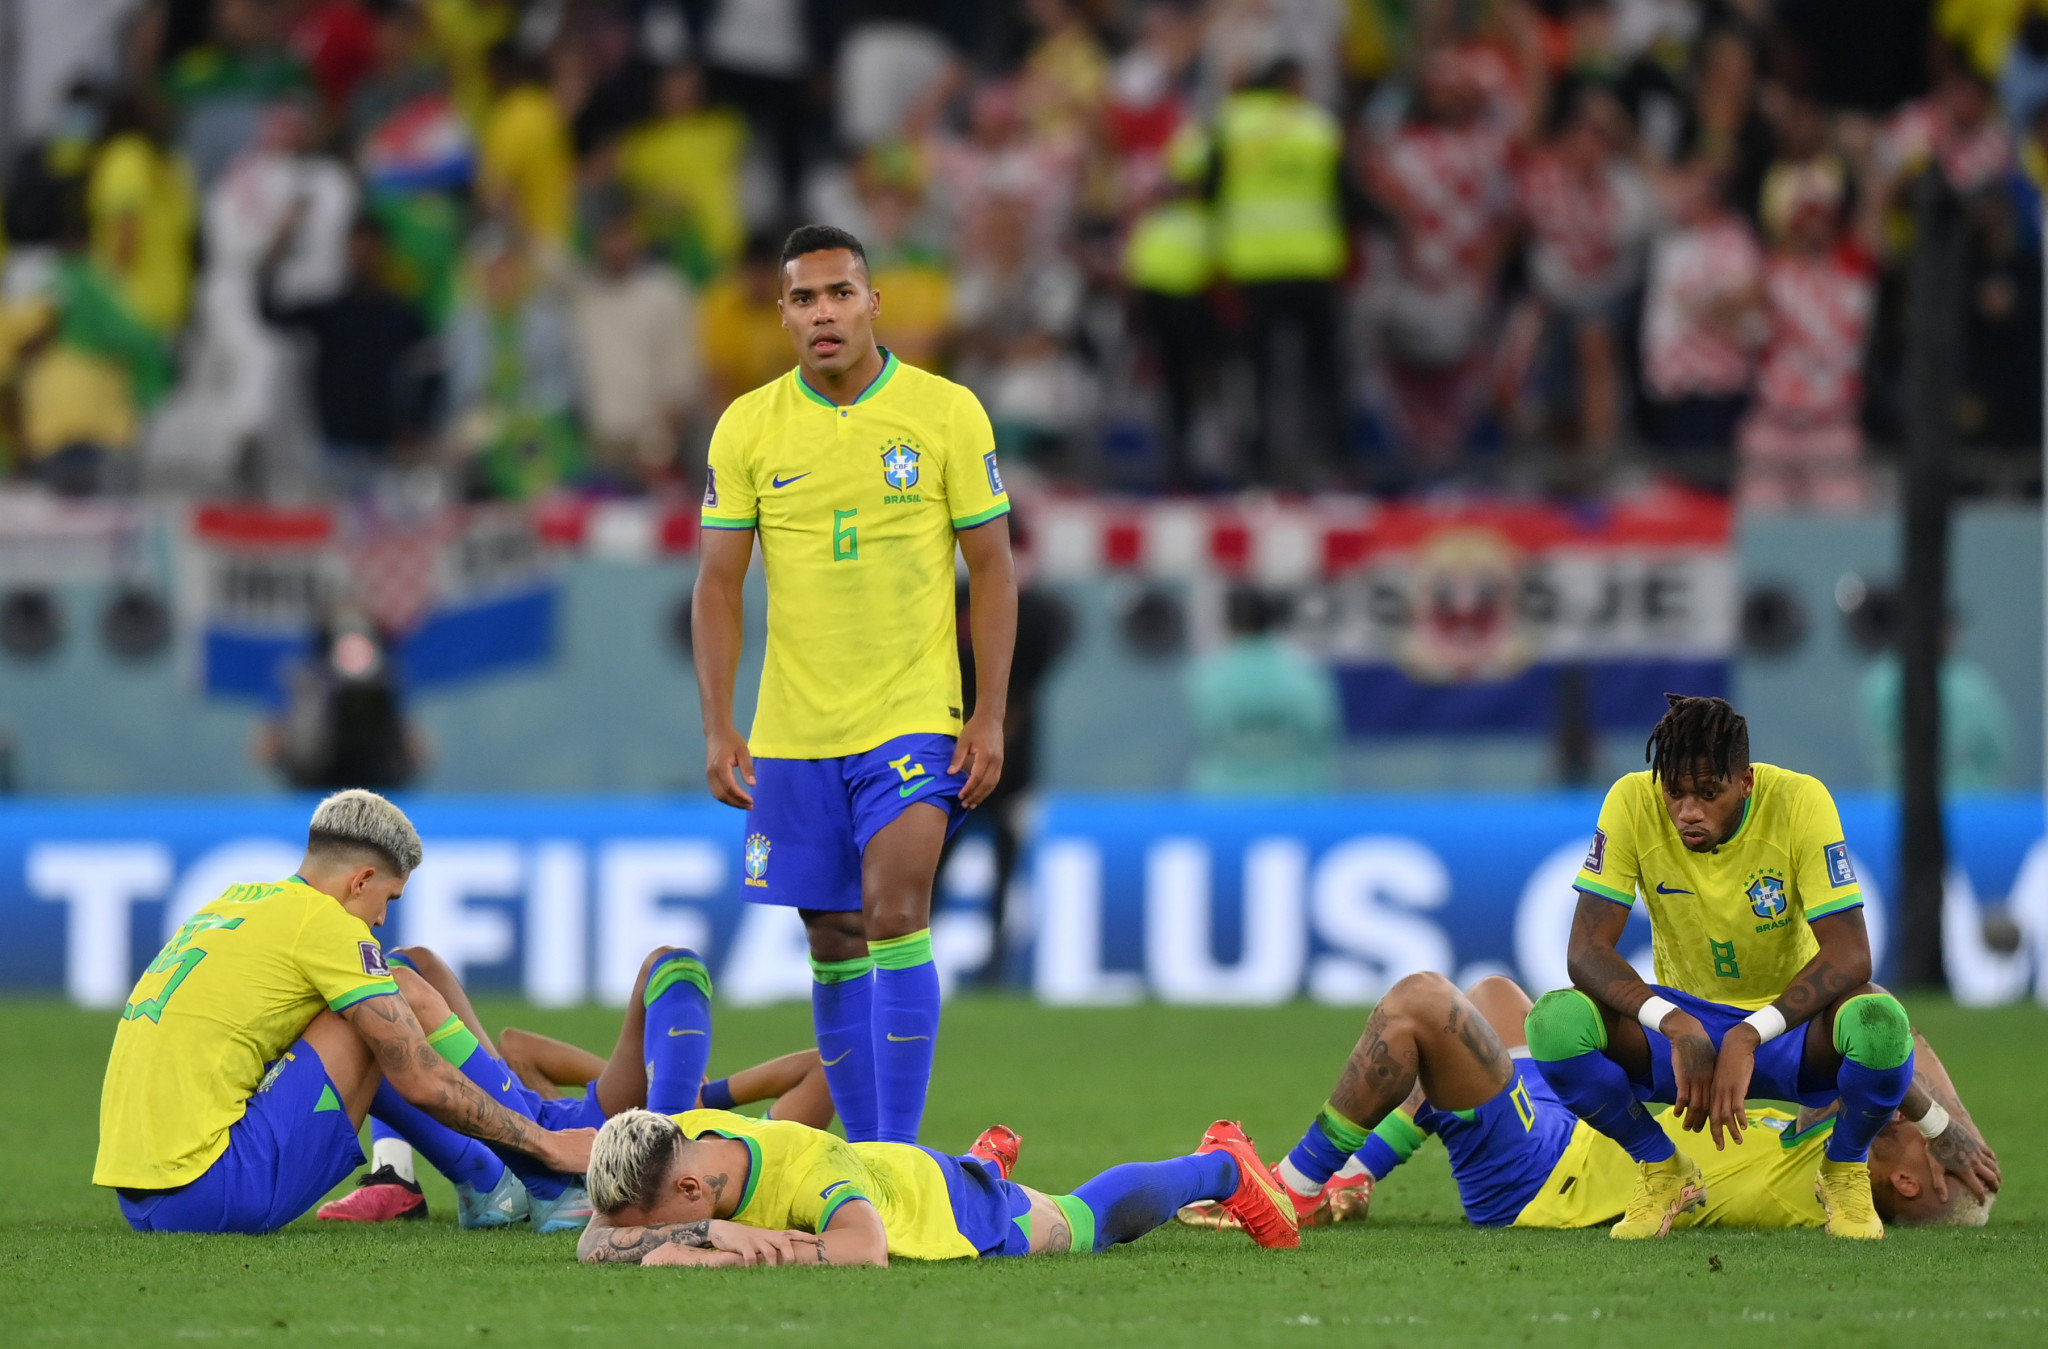 Brazil's players were distraught at the final whistle after their surprise World Cup exit ©Getty Images